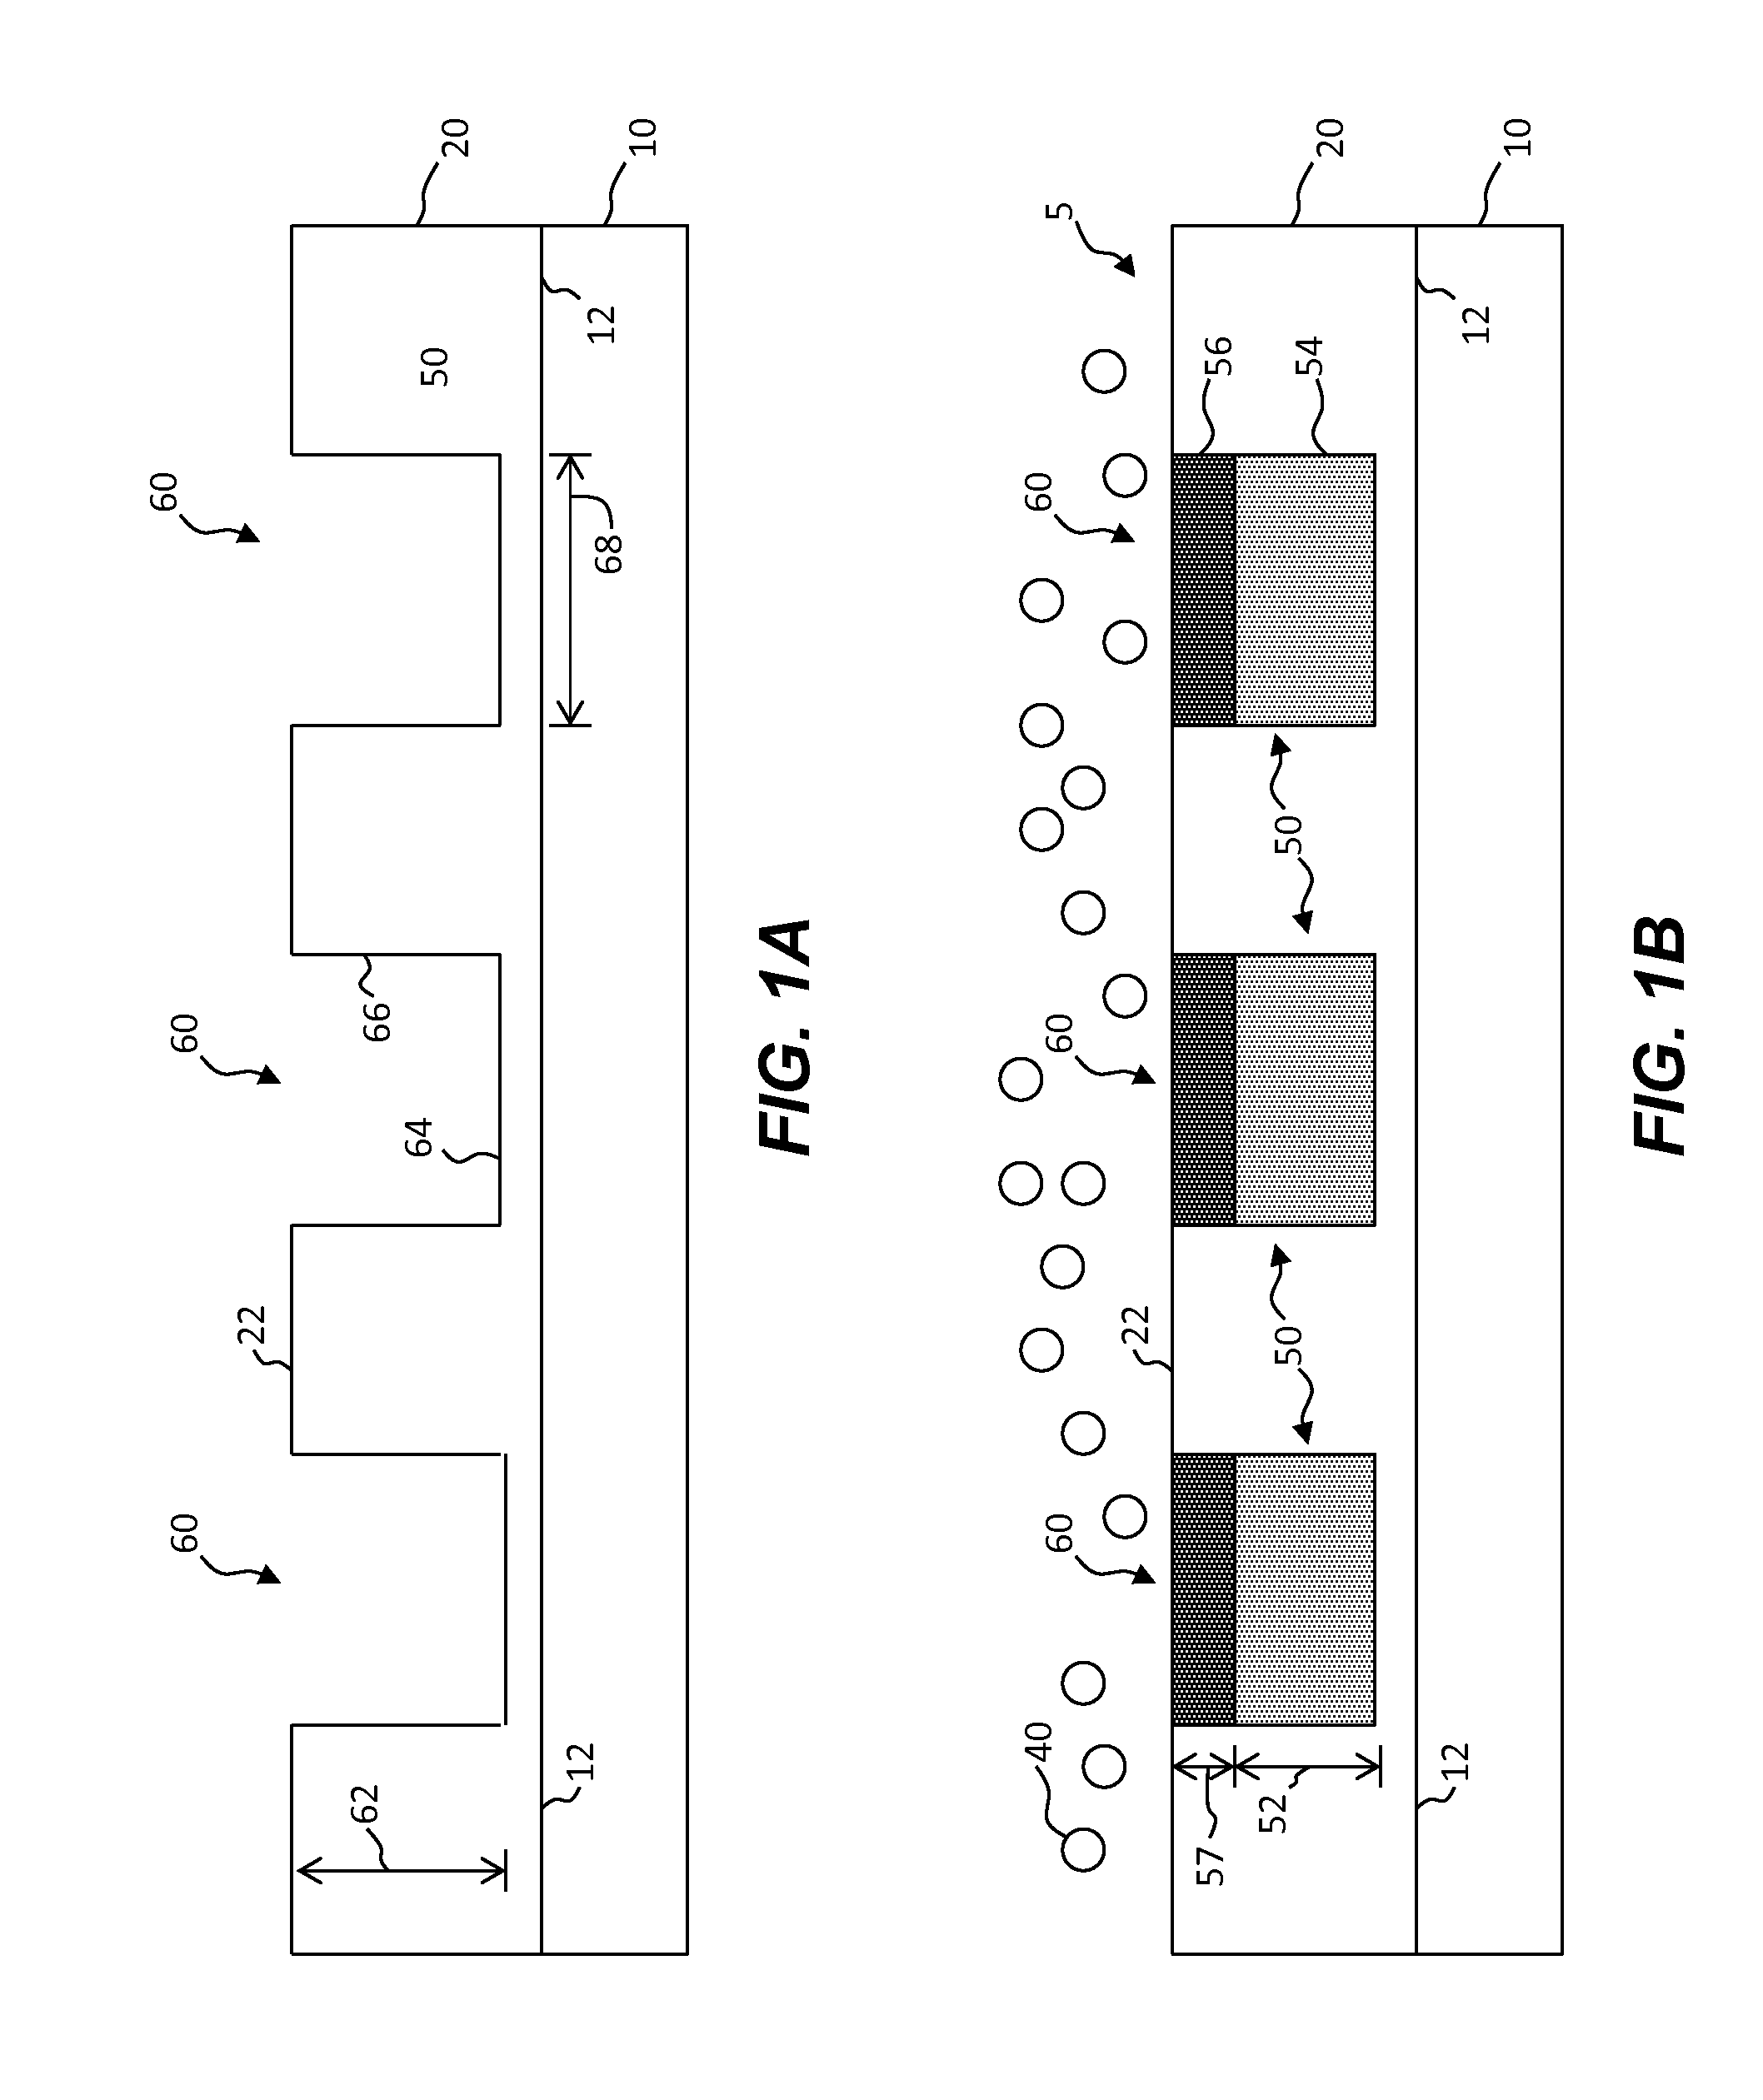 Imprinted thin-film electronic sensor structure